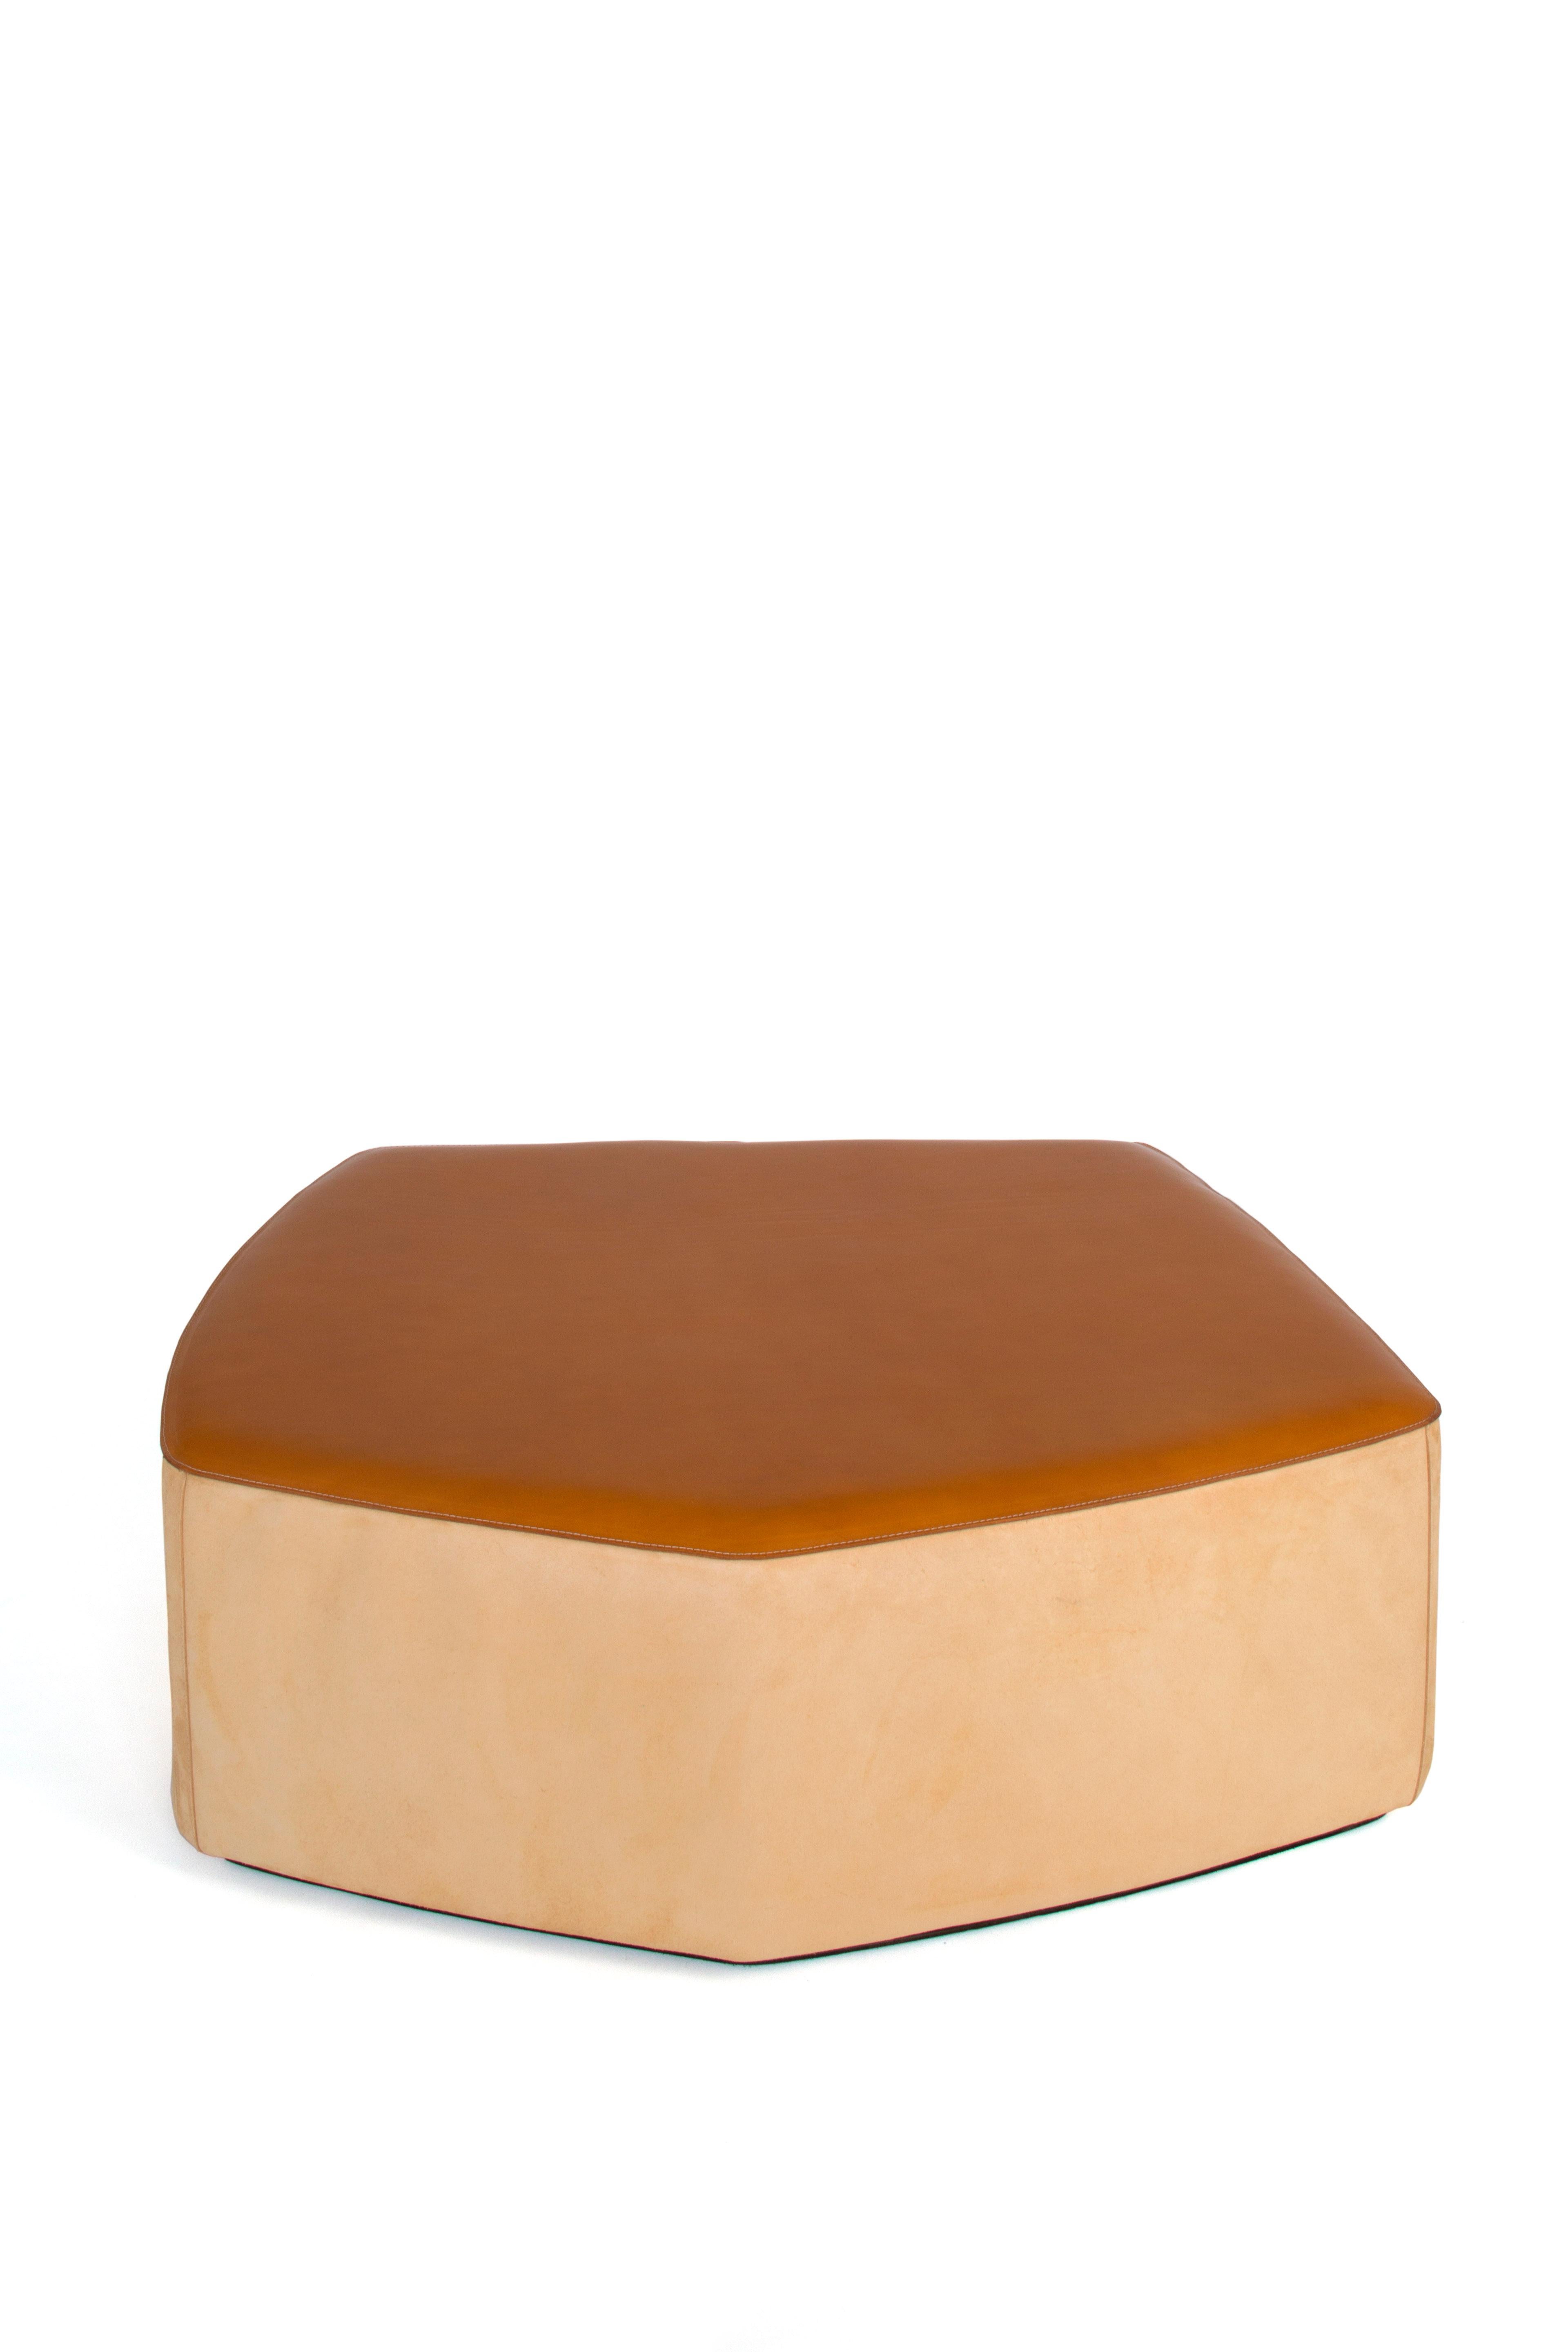 Set of 3 Pouf! Leather Stools by Nestor Perkal For Sale 5